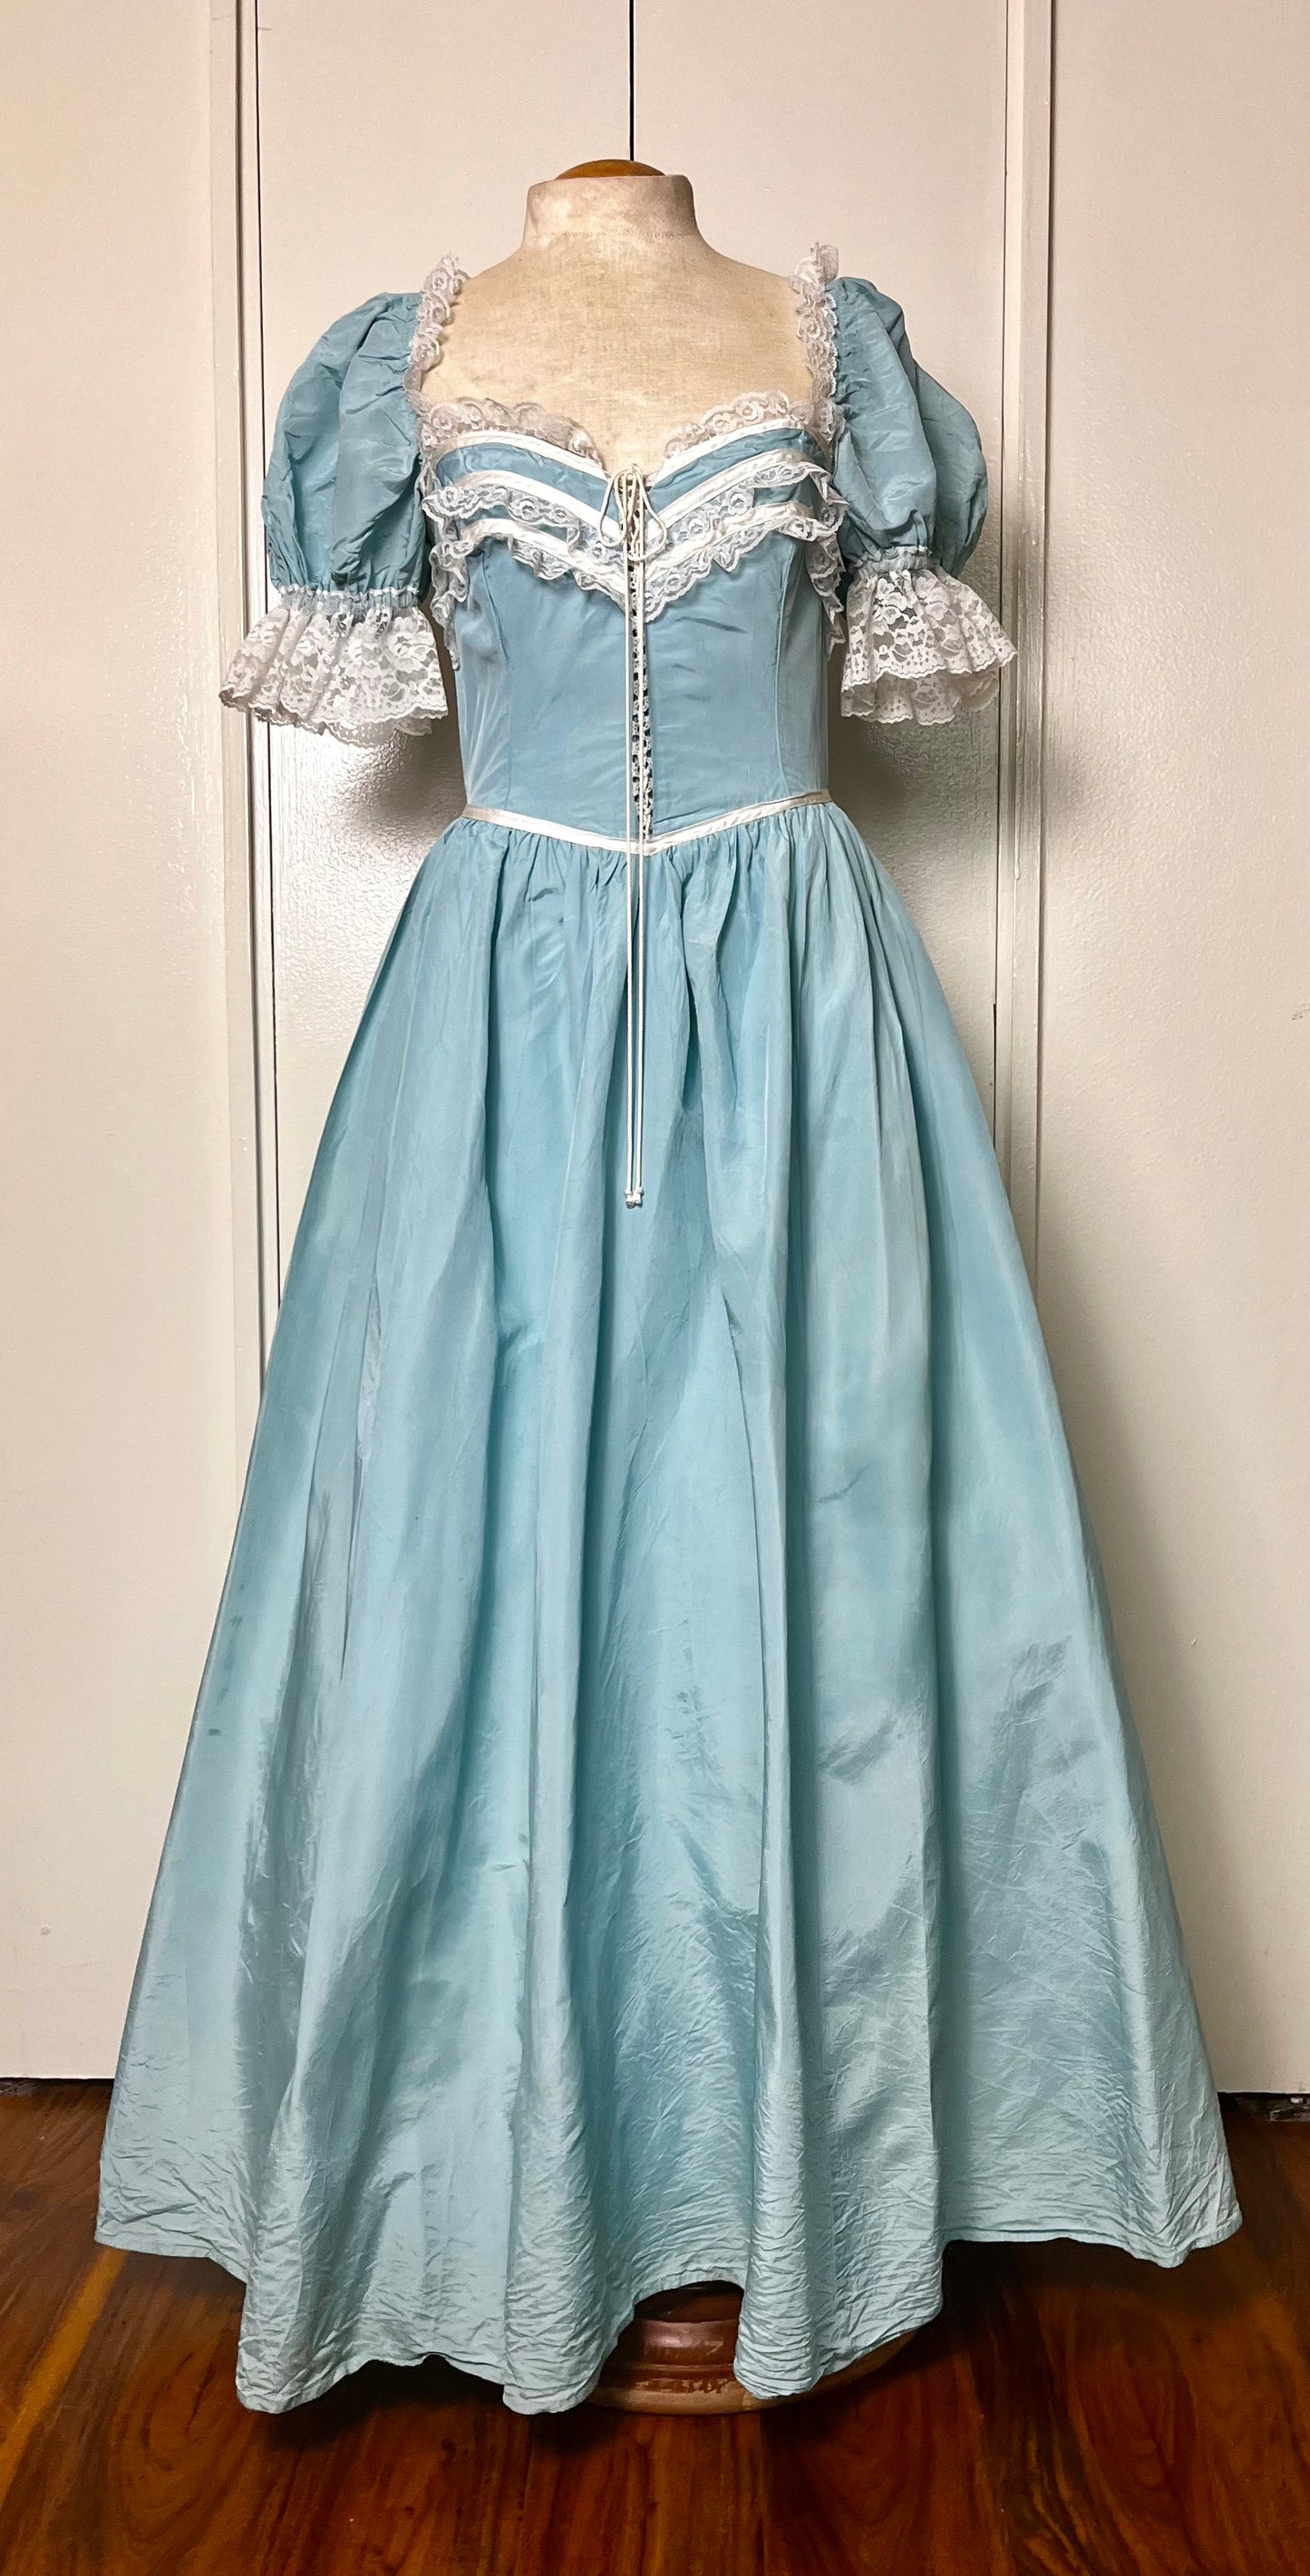 Vintage 1970's "JCPenney" Blue Gown (in the style of Gunne Sax)